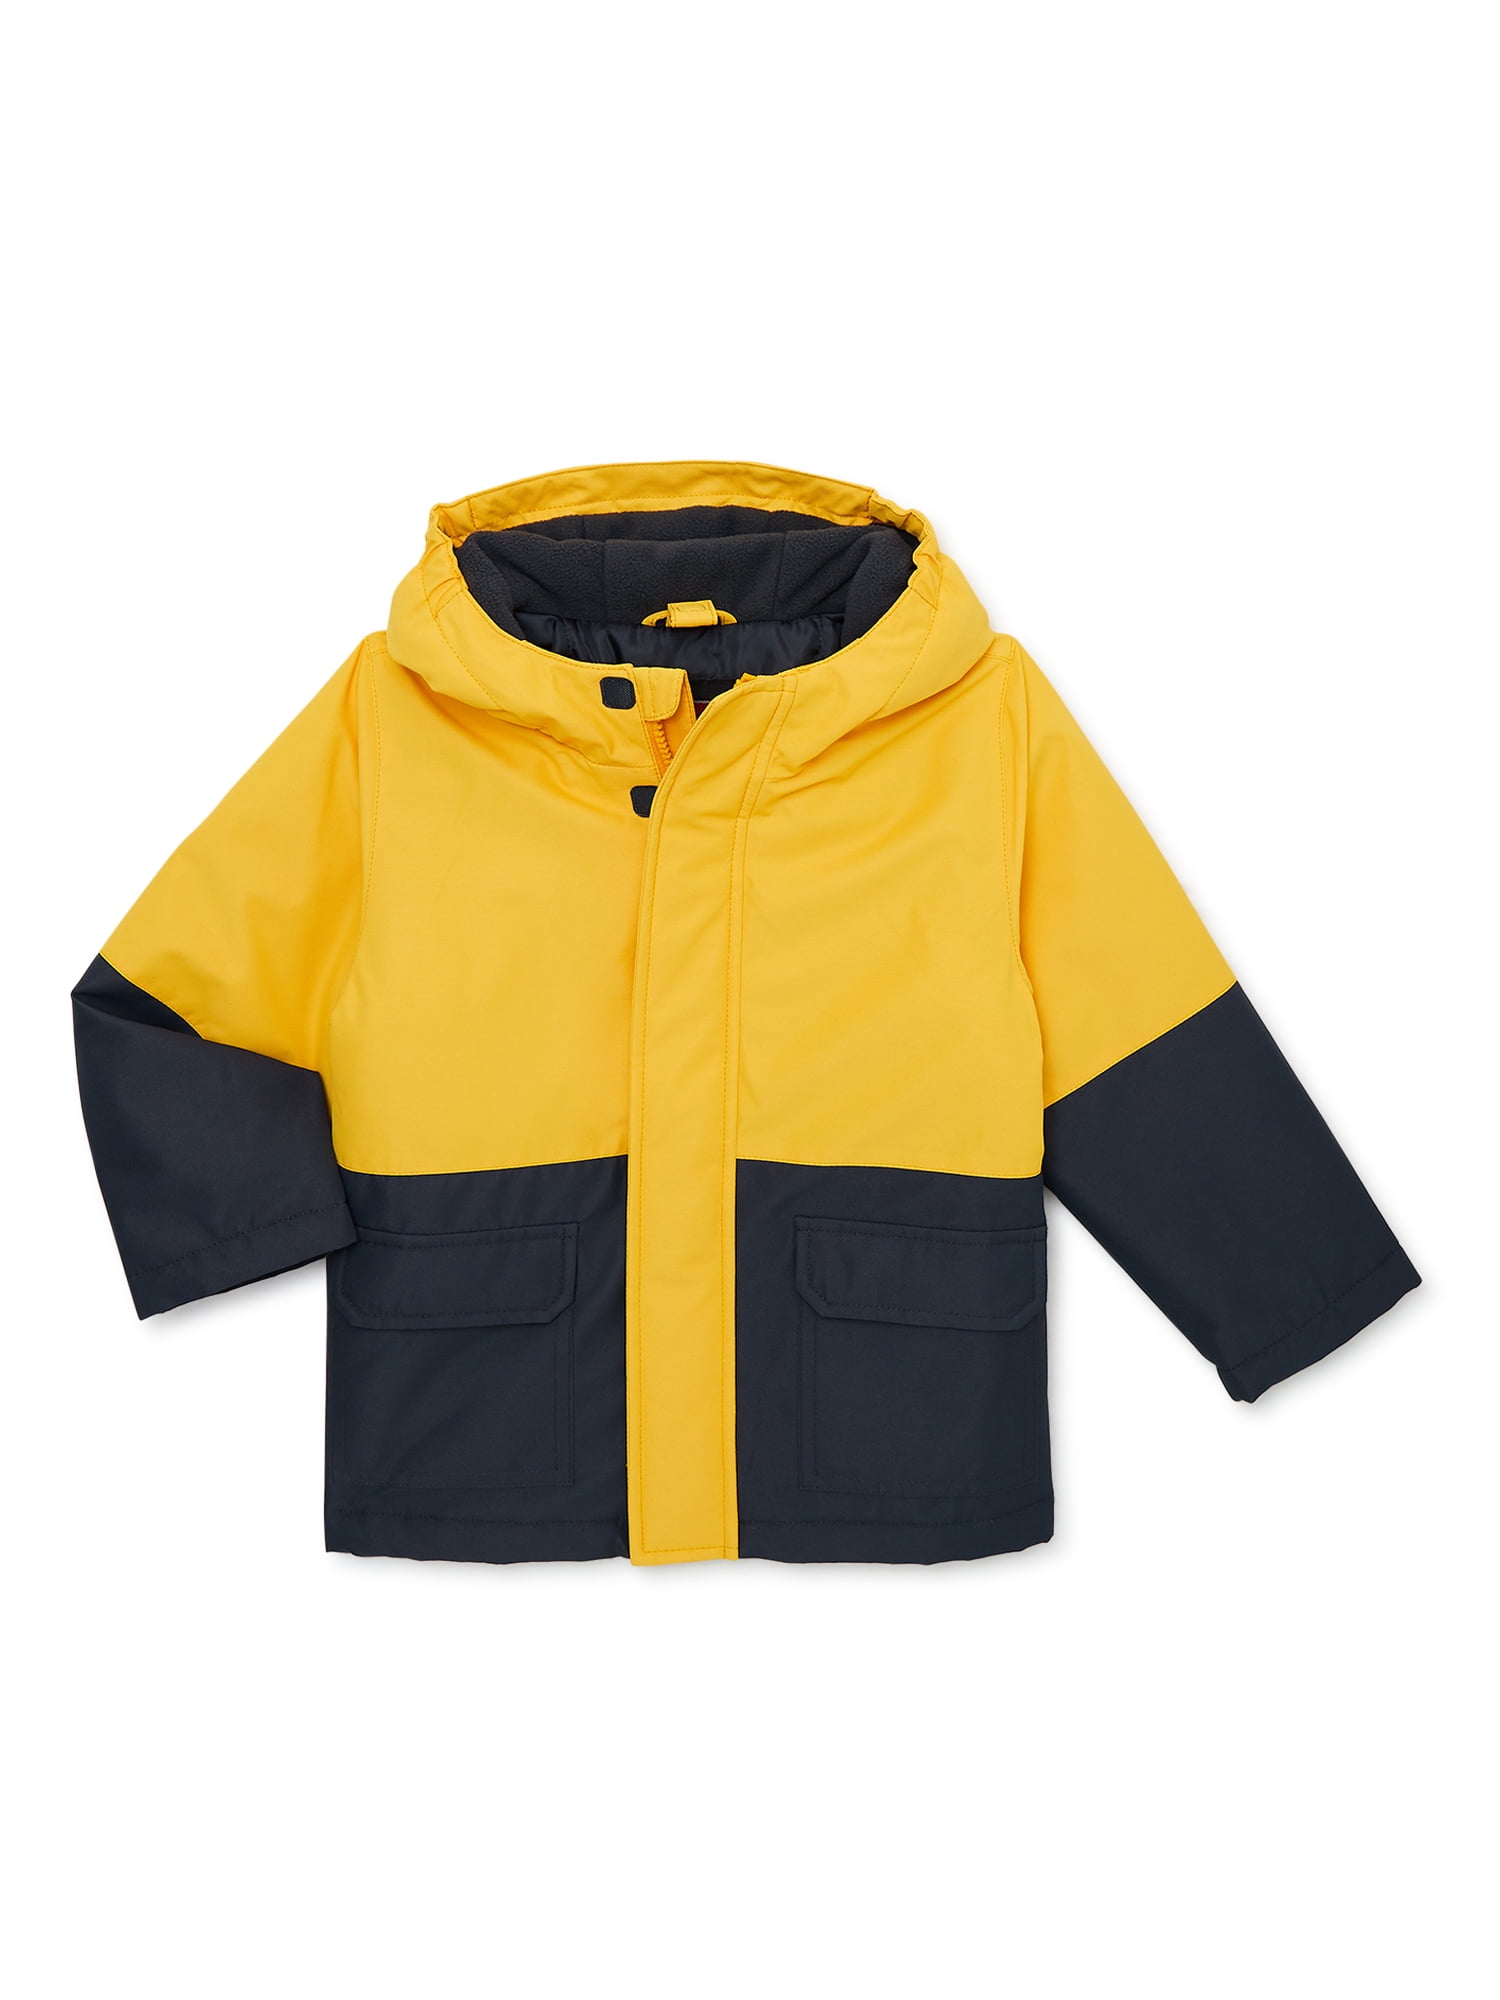 Swiss Tech Toddler Boy Heavyweight Systems Jacket, 4-in-1, Sizes 2T-5T